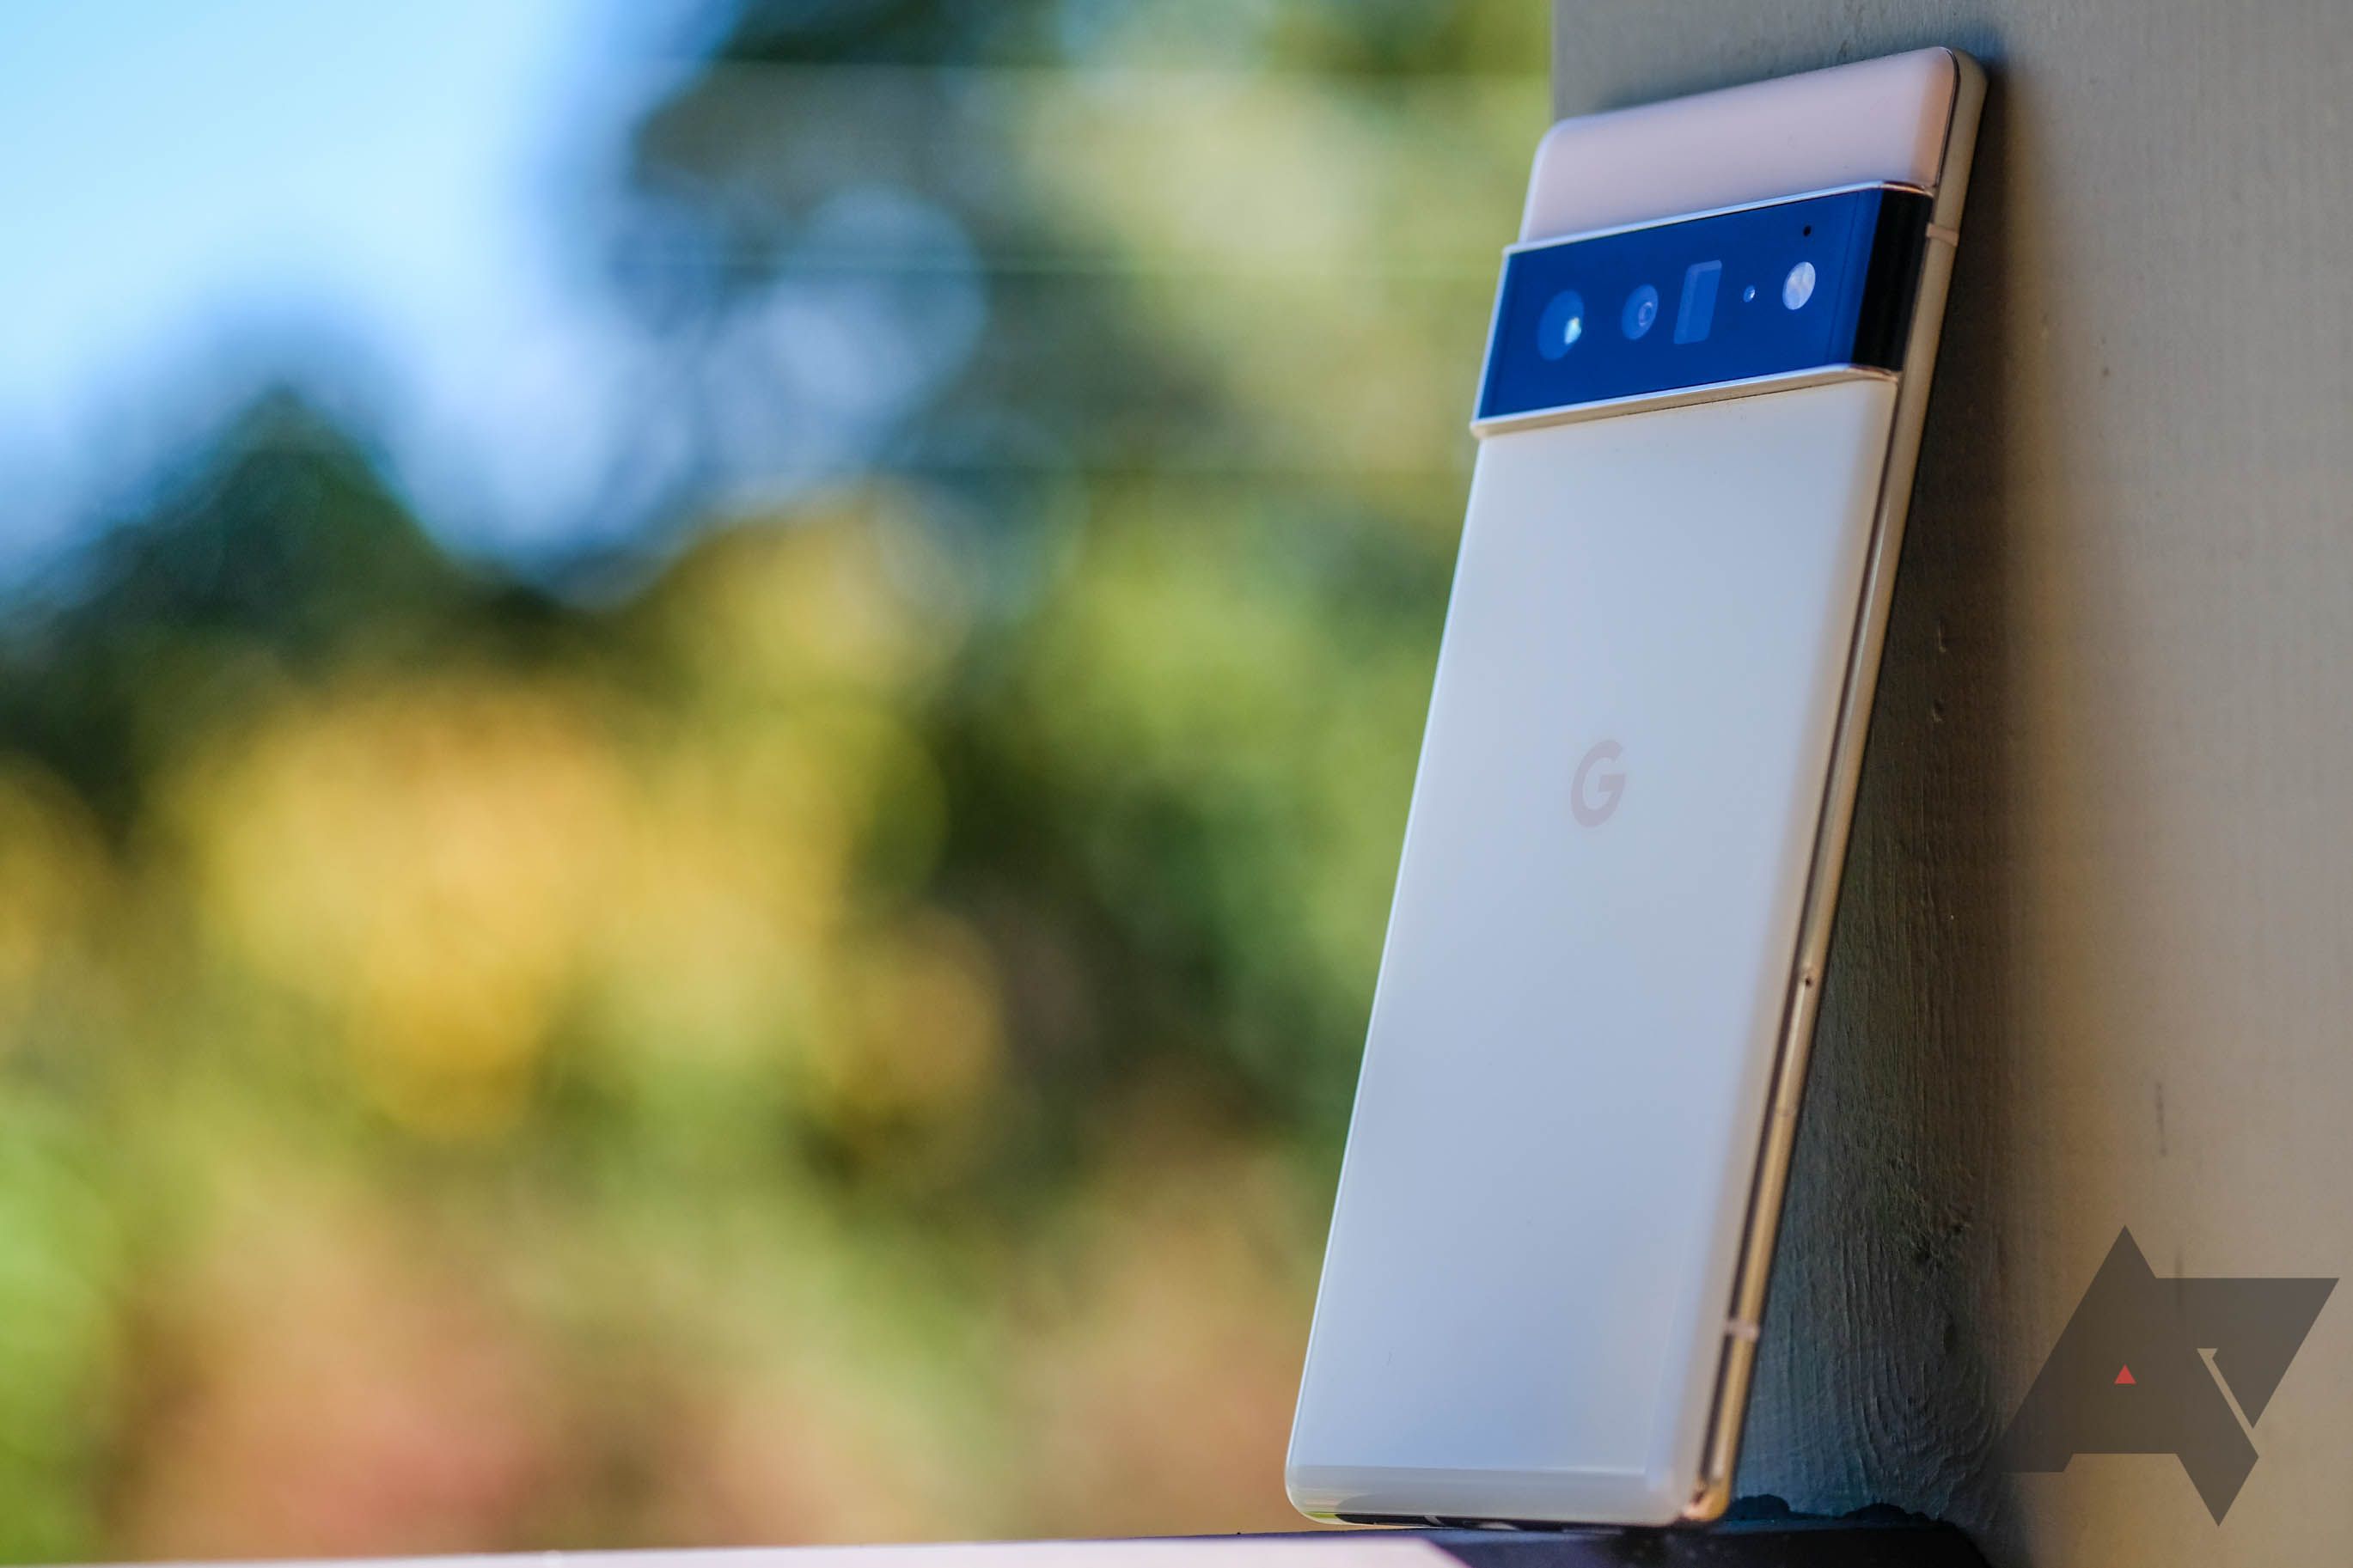 Google brings the March security patch to the Pixel 6 and Pixel 6 Pro